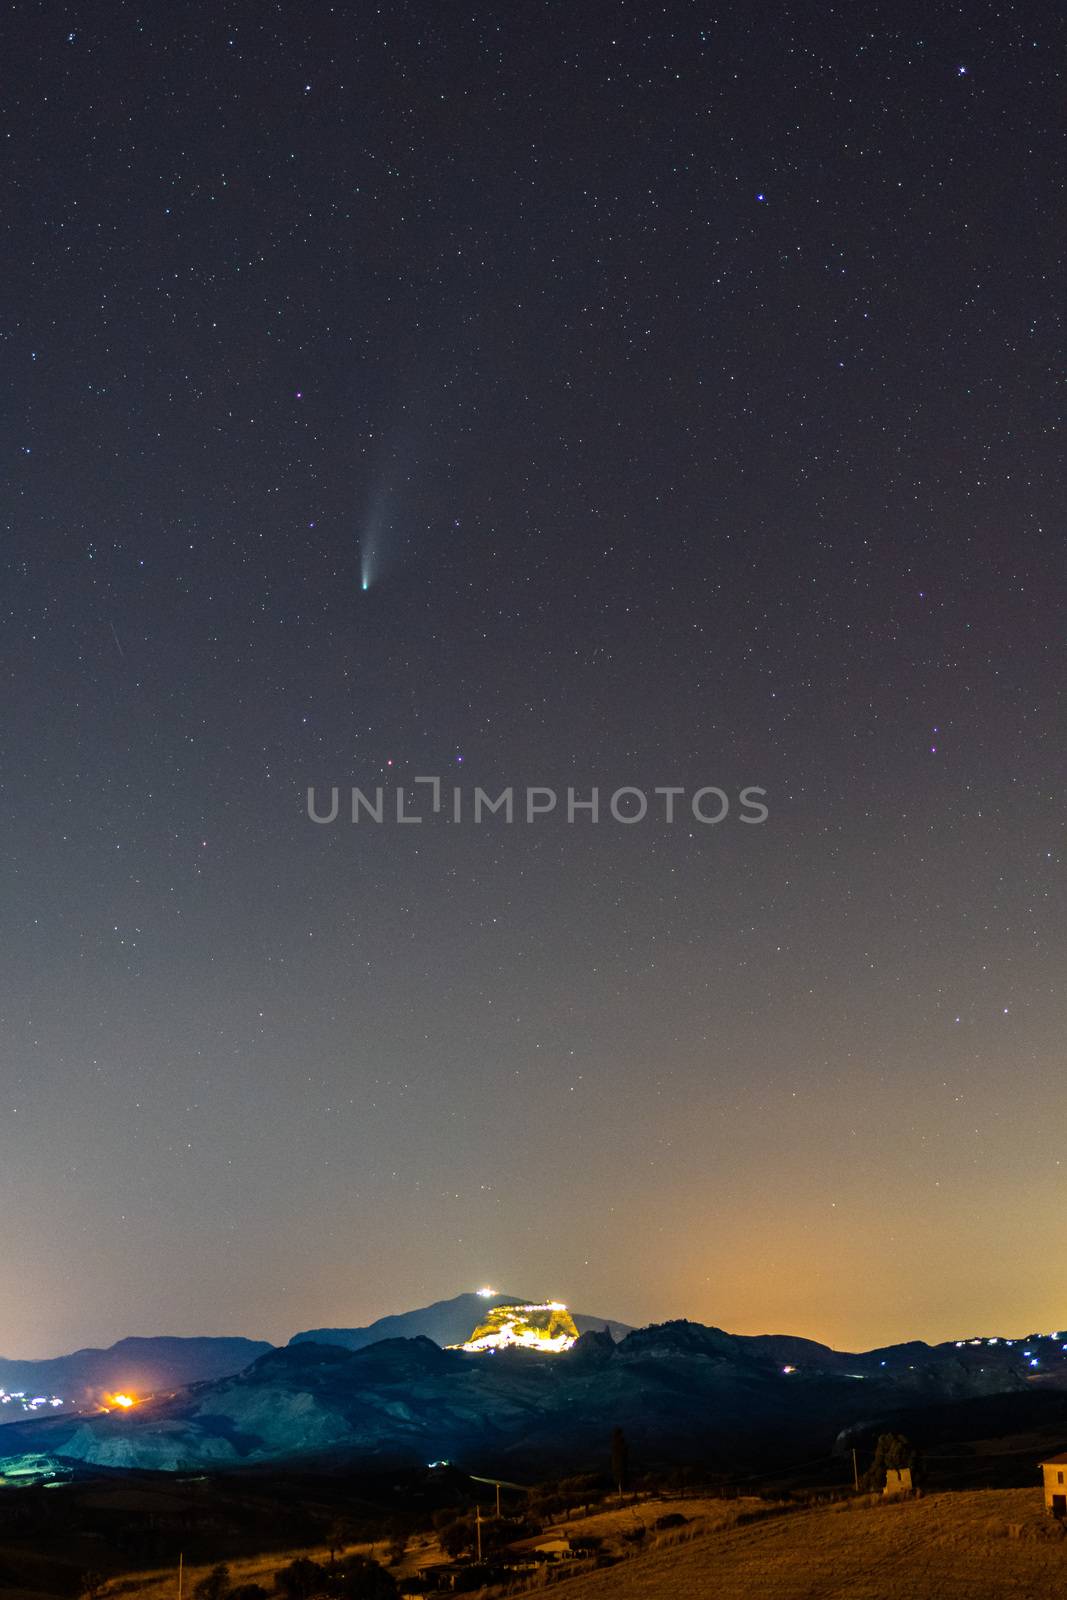 Neowise Comet and its long dust above Sutera medieval town by mauricallari